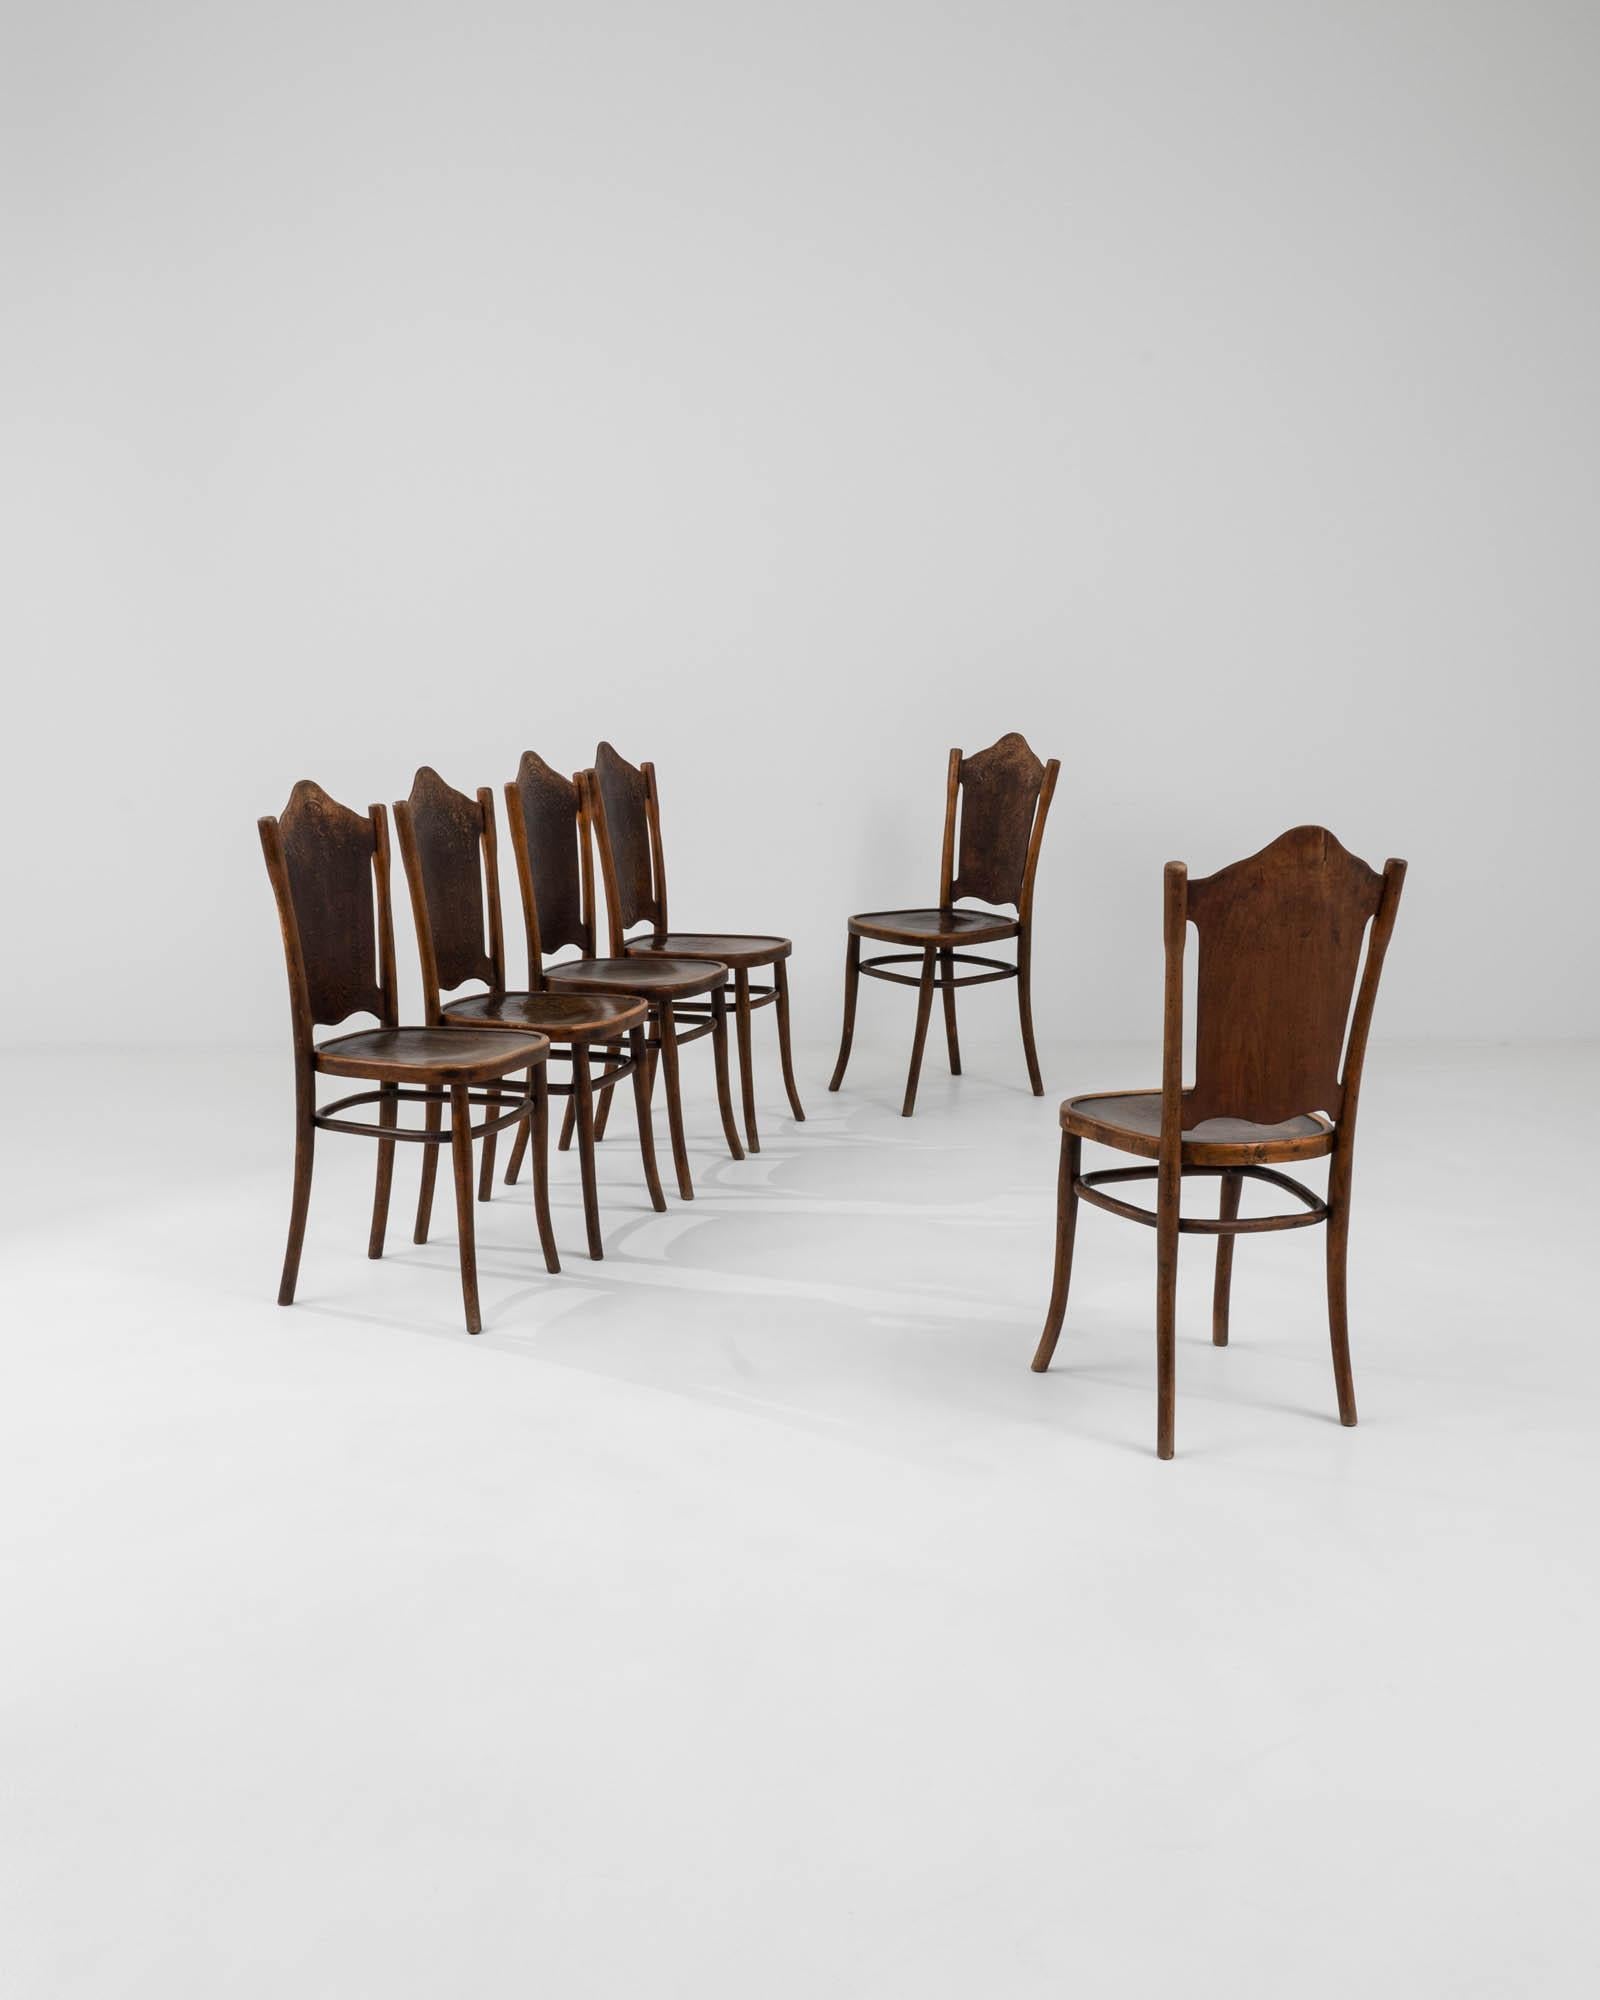 Step back in time and into the realm of classic elegance with this 1910s Austrian Wooden Dining Chair set by Thonet. These chairs are a true testament to the timeless Thonet design ethos, which emphasizes form, function, and simplicity. Each chair